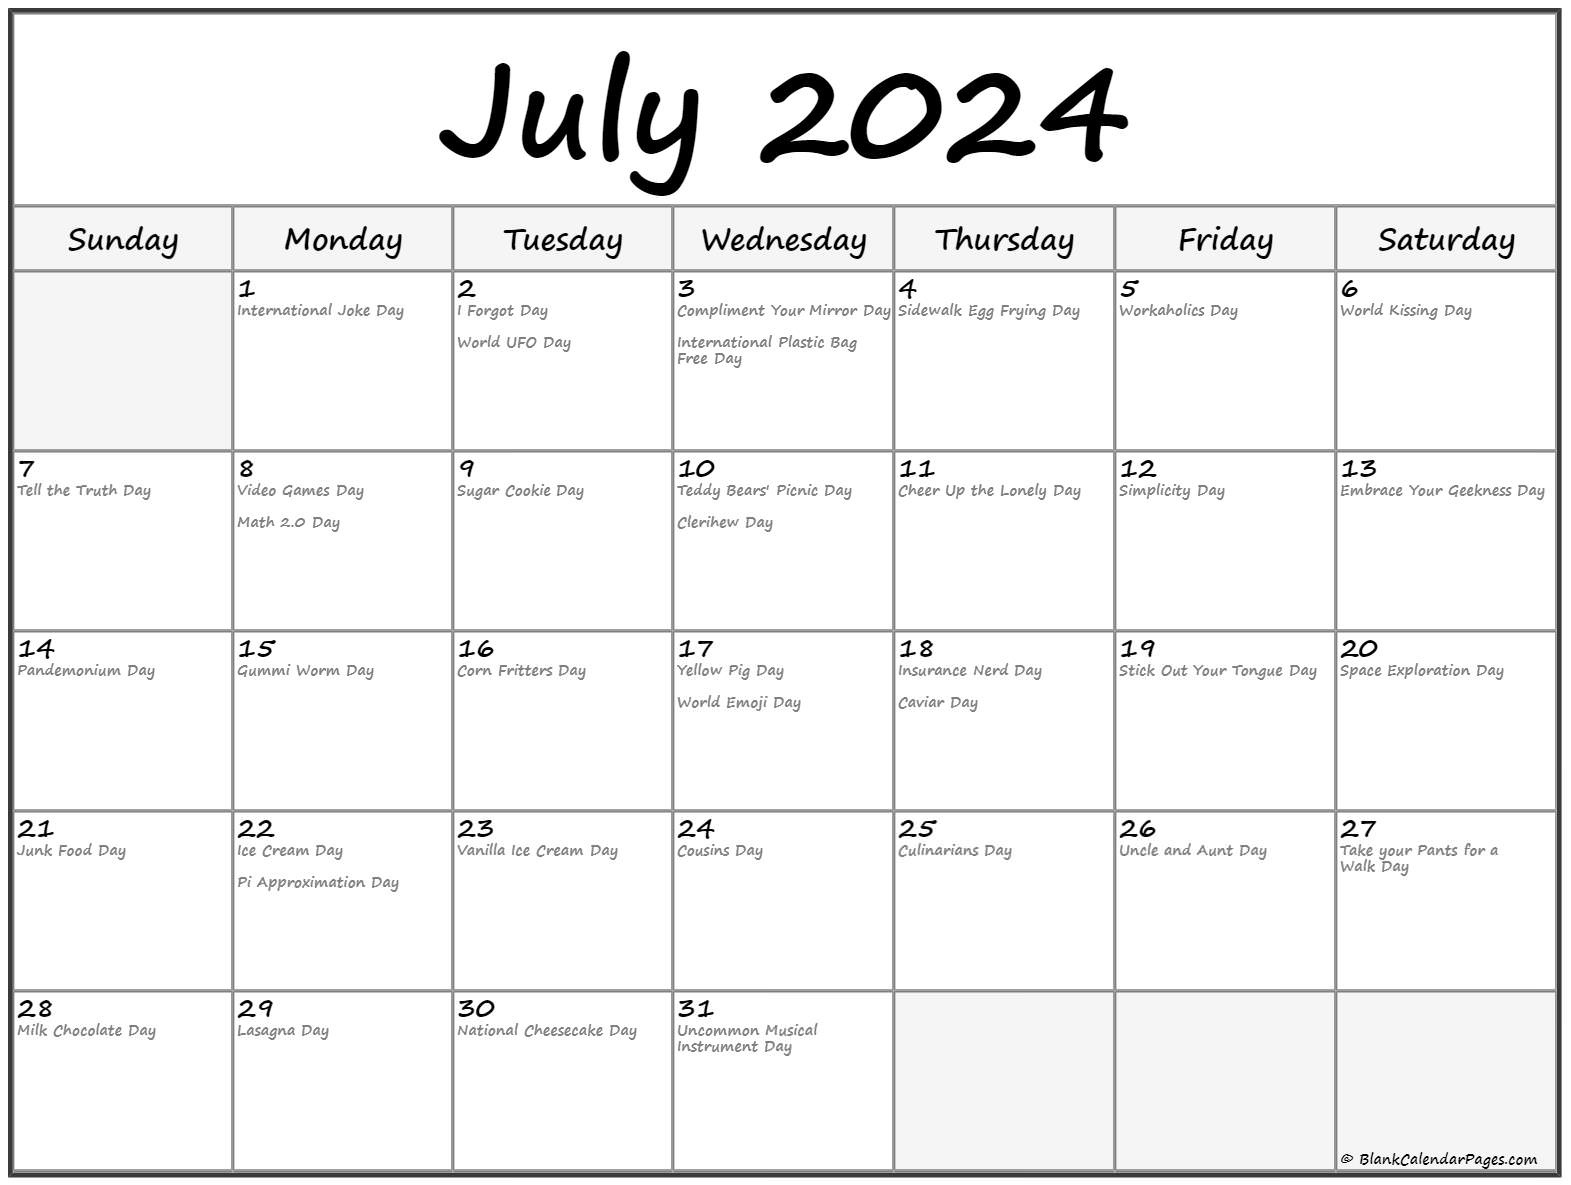 July 2024 With Holidays Calendar with July 2024 Calendar National Days